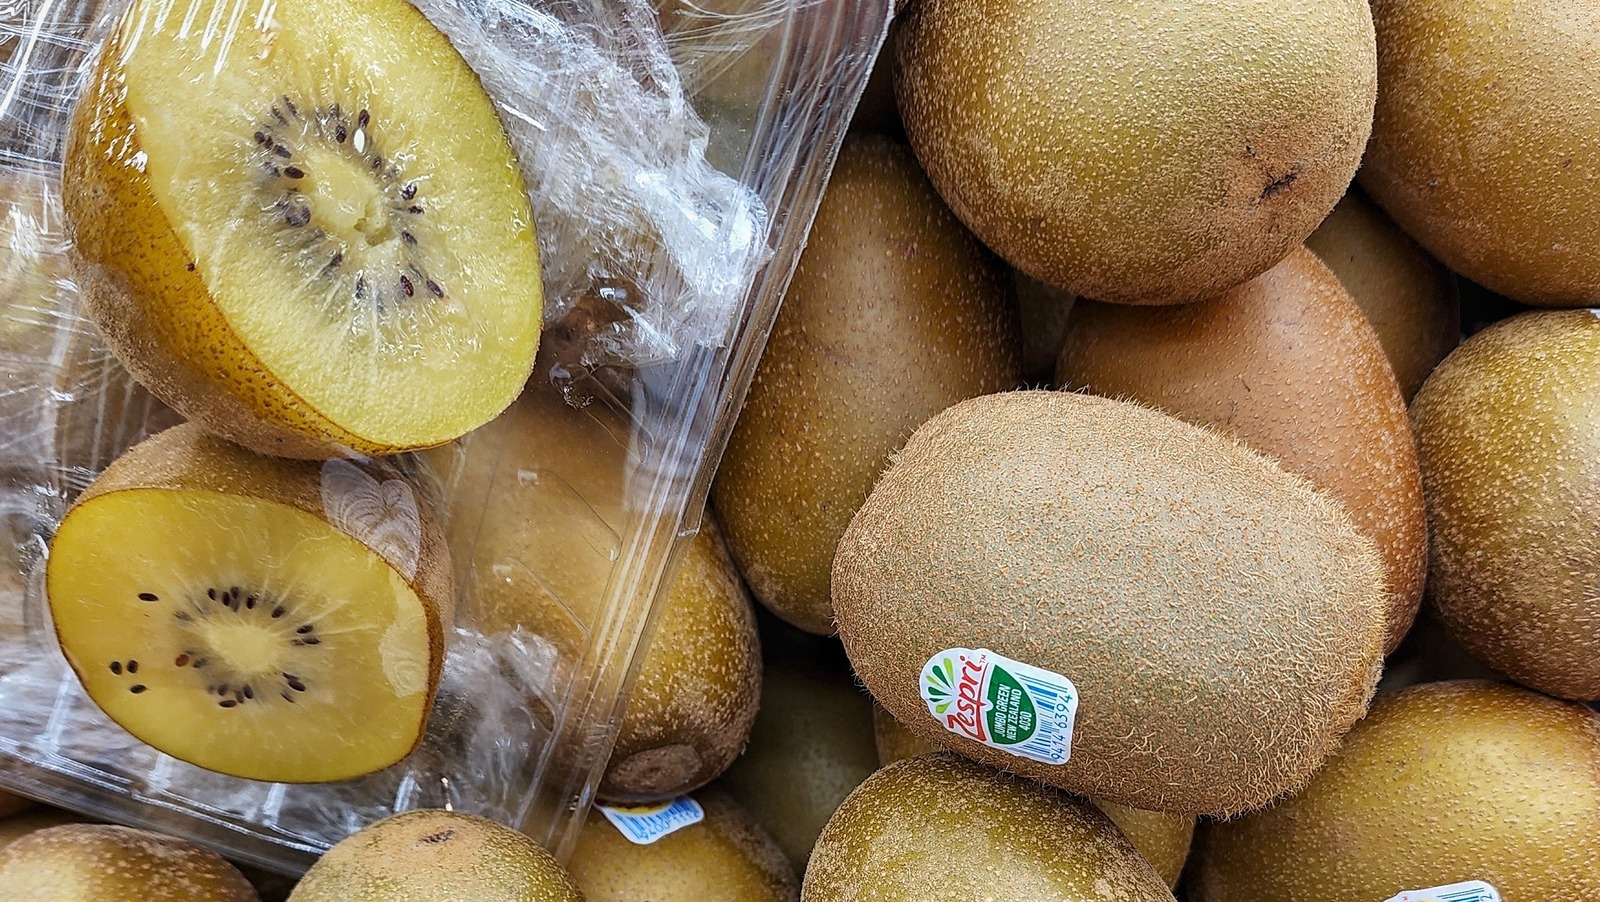 FDA: Kiwifruit Recall Due To Listeria Concerns Affects 14 States